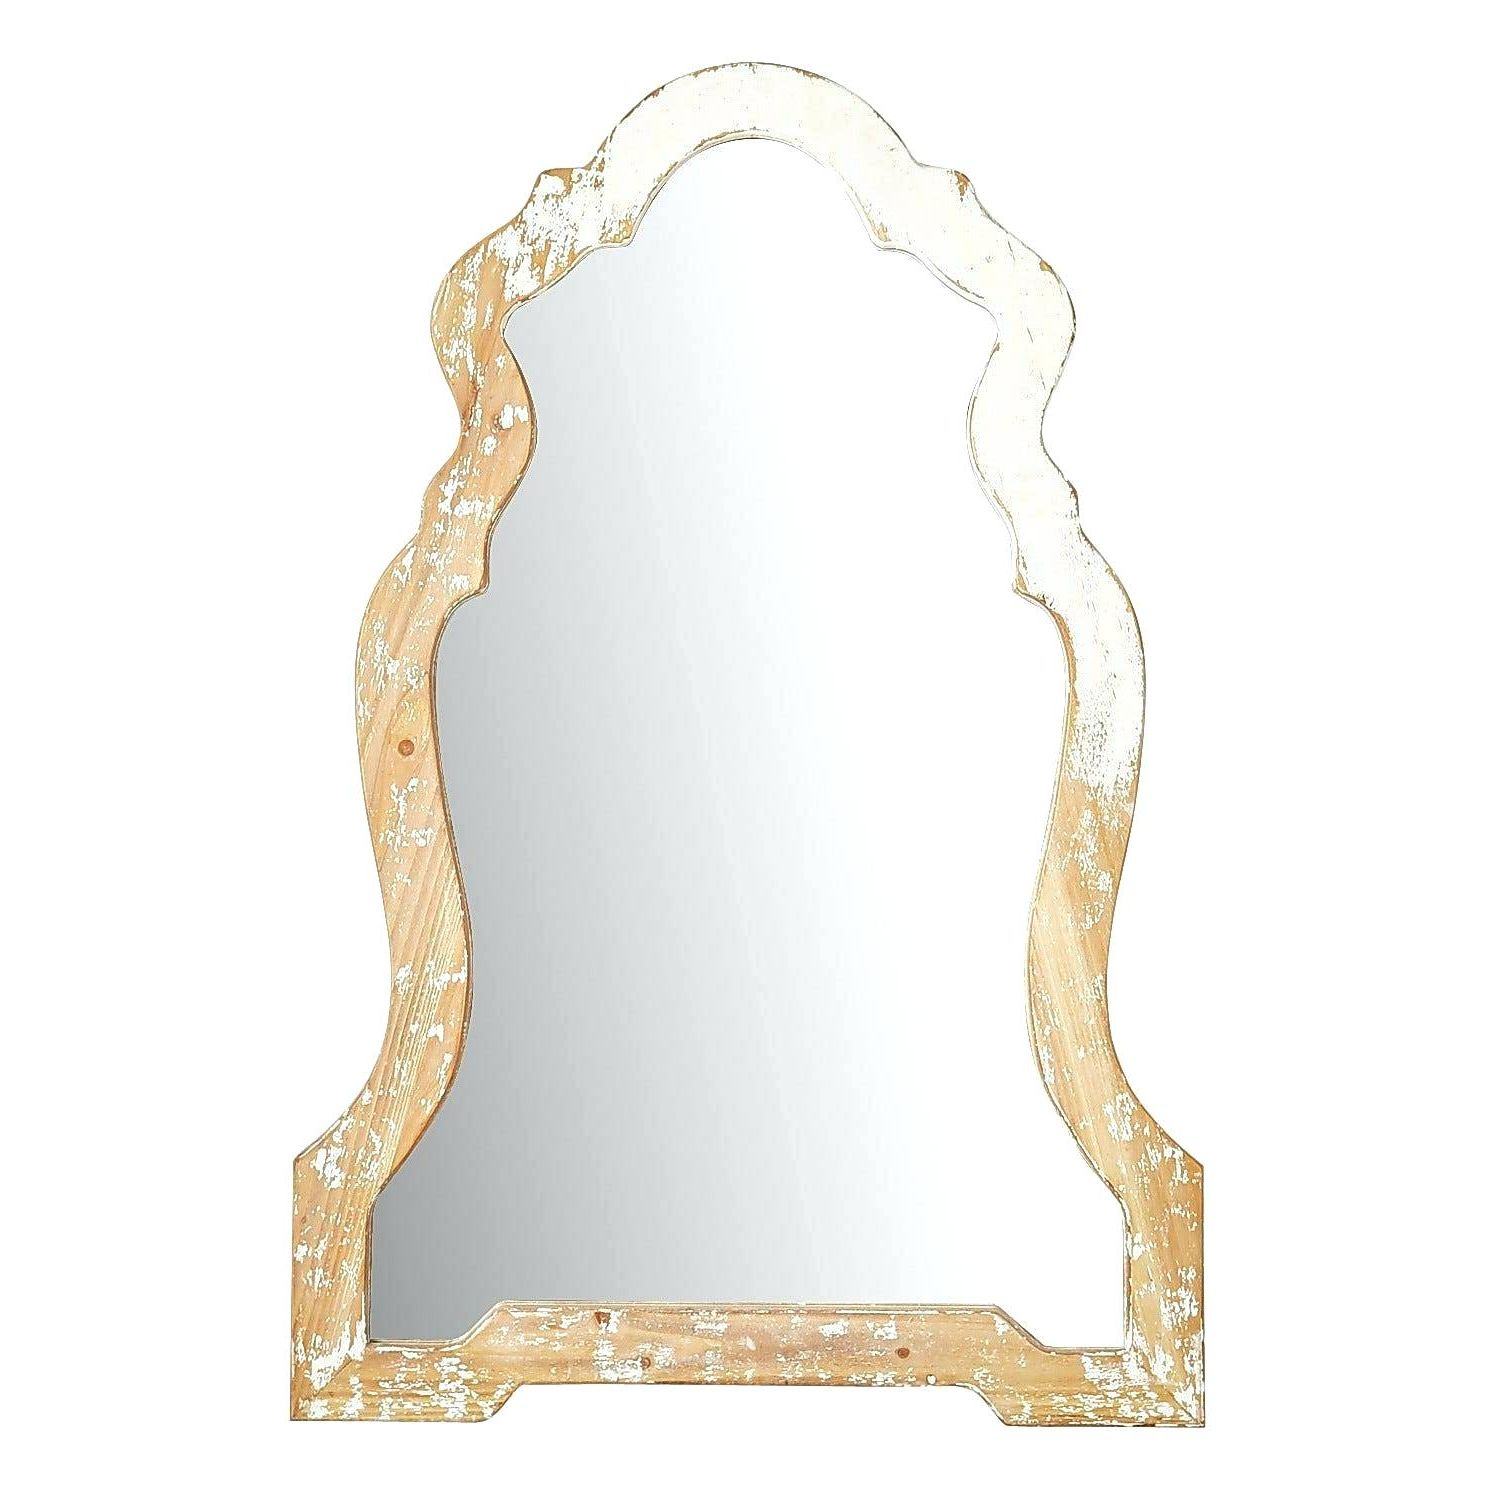 Arch Mirror Top Vertical Wall Interiors Reviews Furniture – Slimg Intended For Widely Used Arch Top Vertical Wall Mirrors (View 10 of 20)